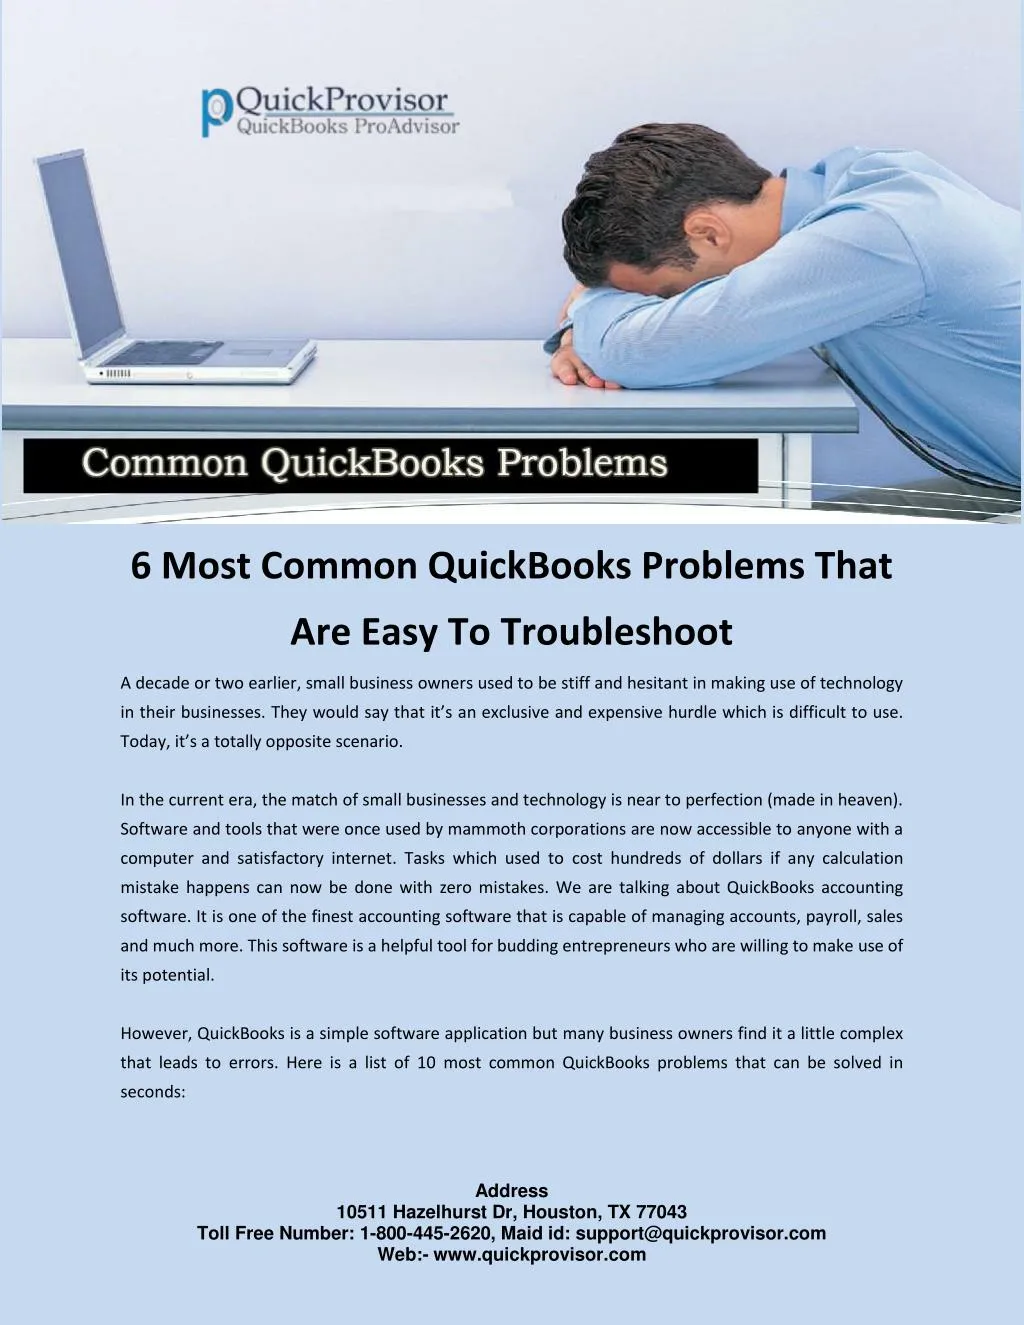 6 most common quickbooks problems that